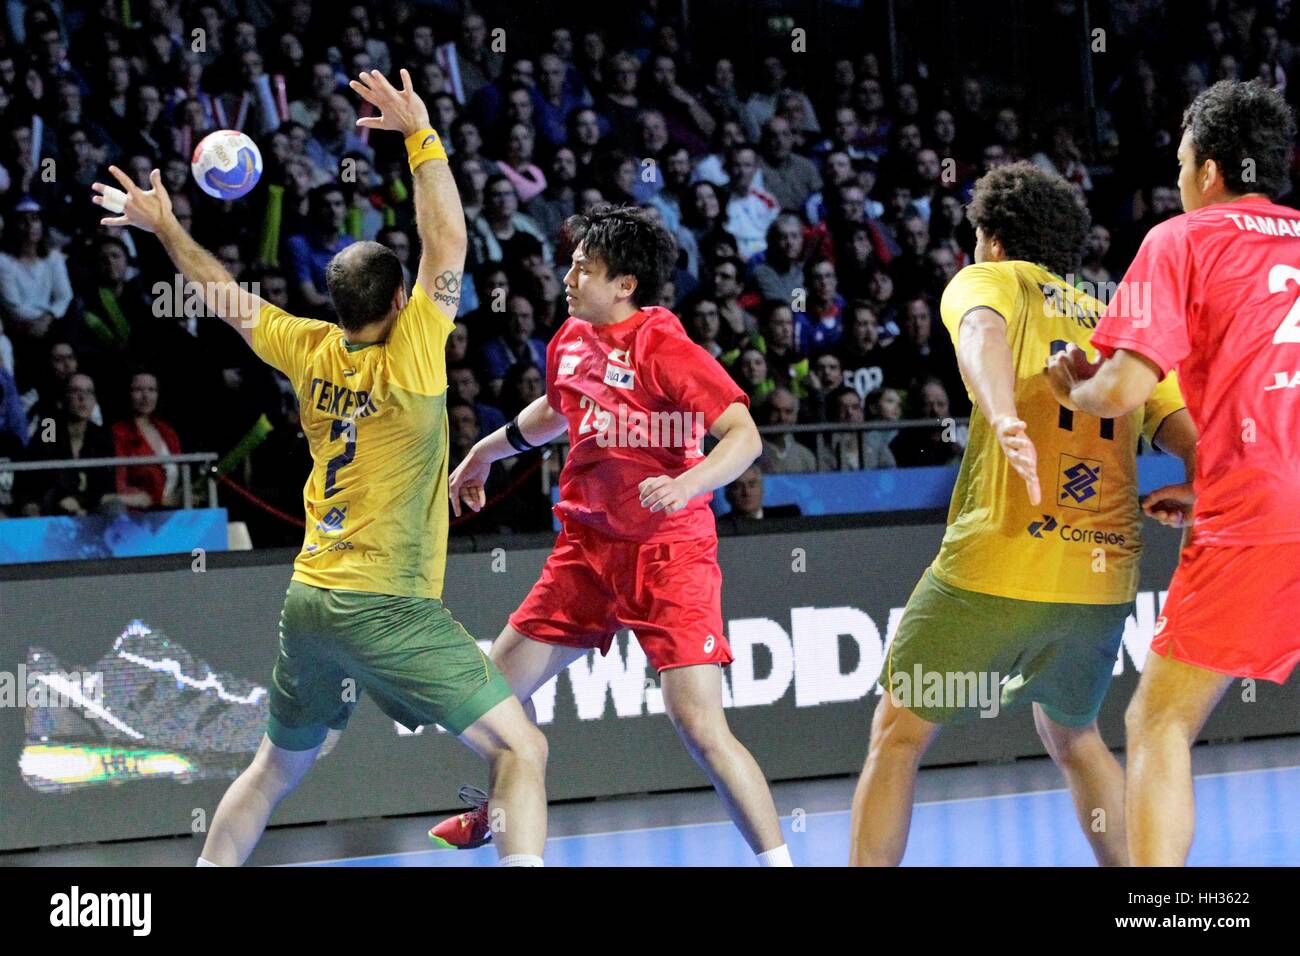 Nantes, France. 15th Jan, 2017. January 15th 2017, Parc Exposition XXL, Nantes, France; 25th World Handball Championships Brazil versus Japan; Huto Agarie Japan in shooting action Credit: Laurent Lairys/Agence Locevaphotos/Alamy Live News Stock Photo